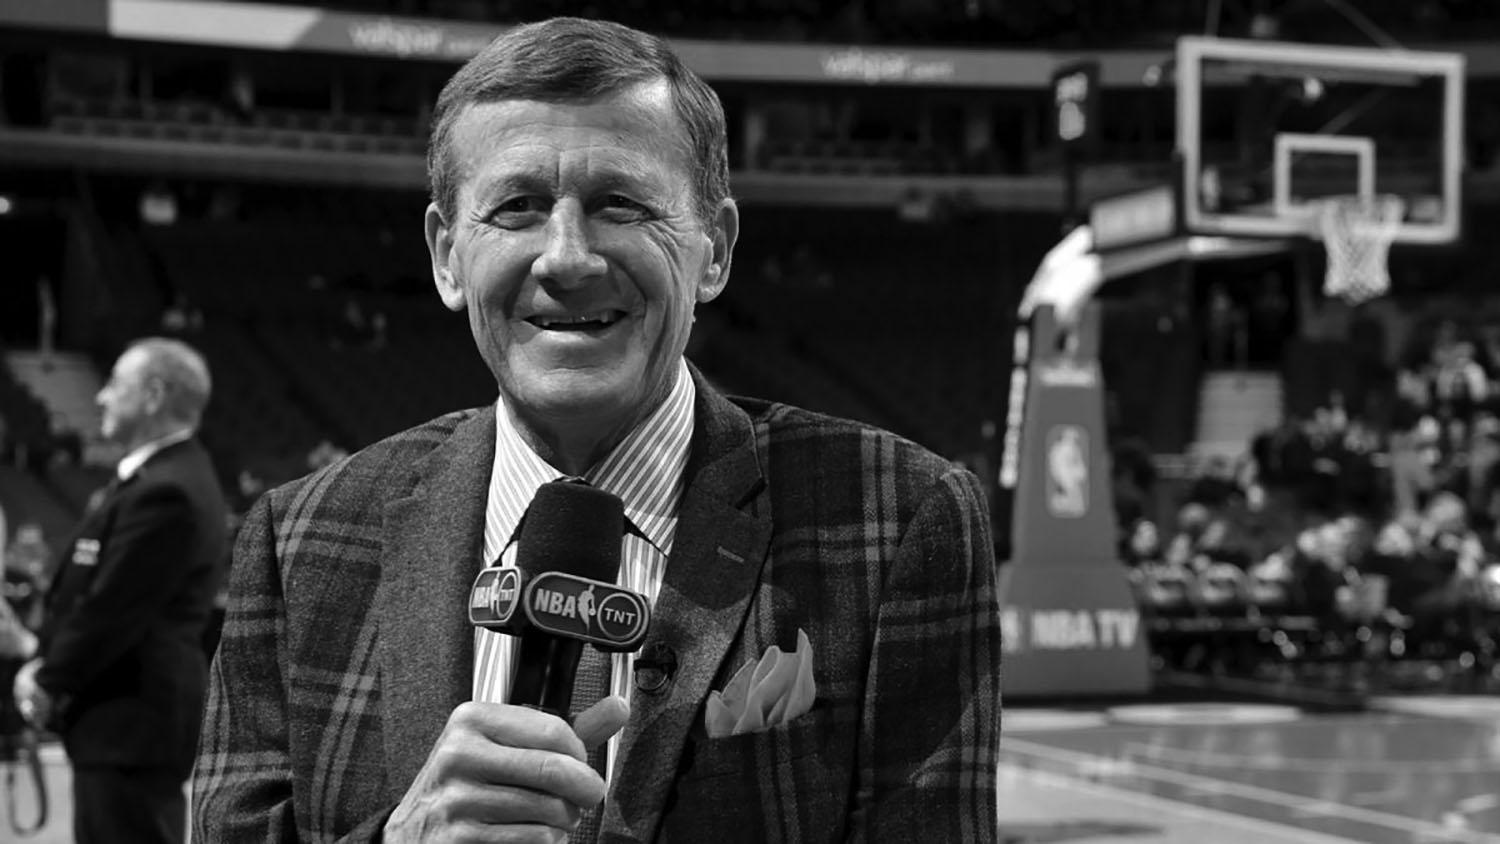 Craig Sager, a well-known sideline reporter in the NBA,  is not only recognized for his professionalism but also for his outgoing, quirky attitude in interviews with NBA personnel.